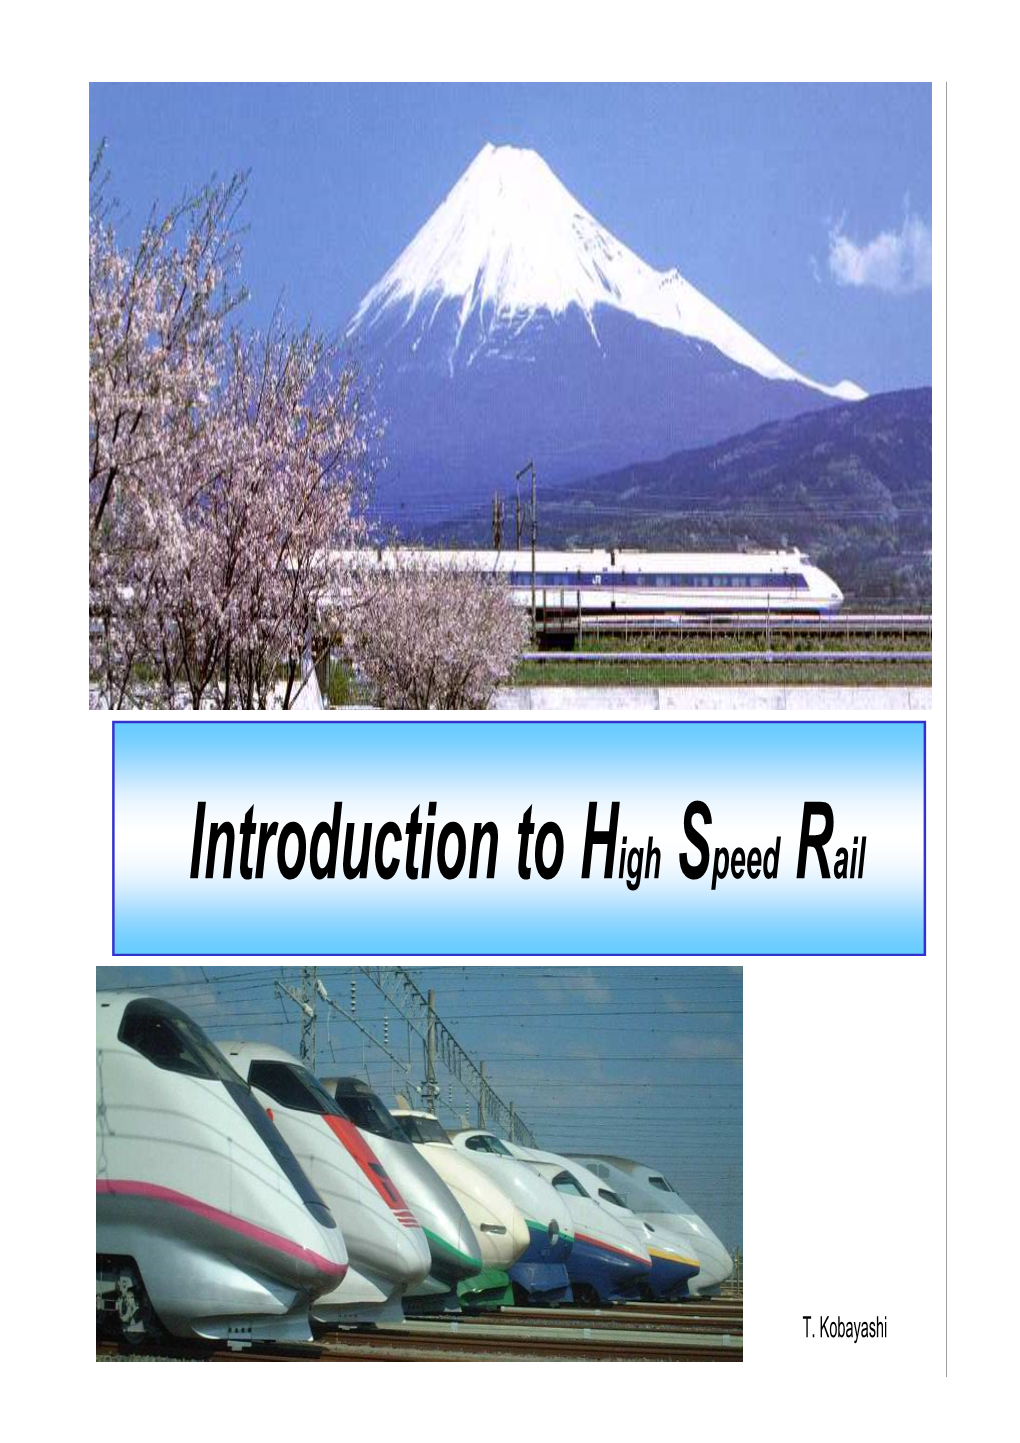 Introduction to High Speed Rail